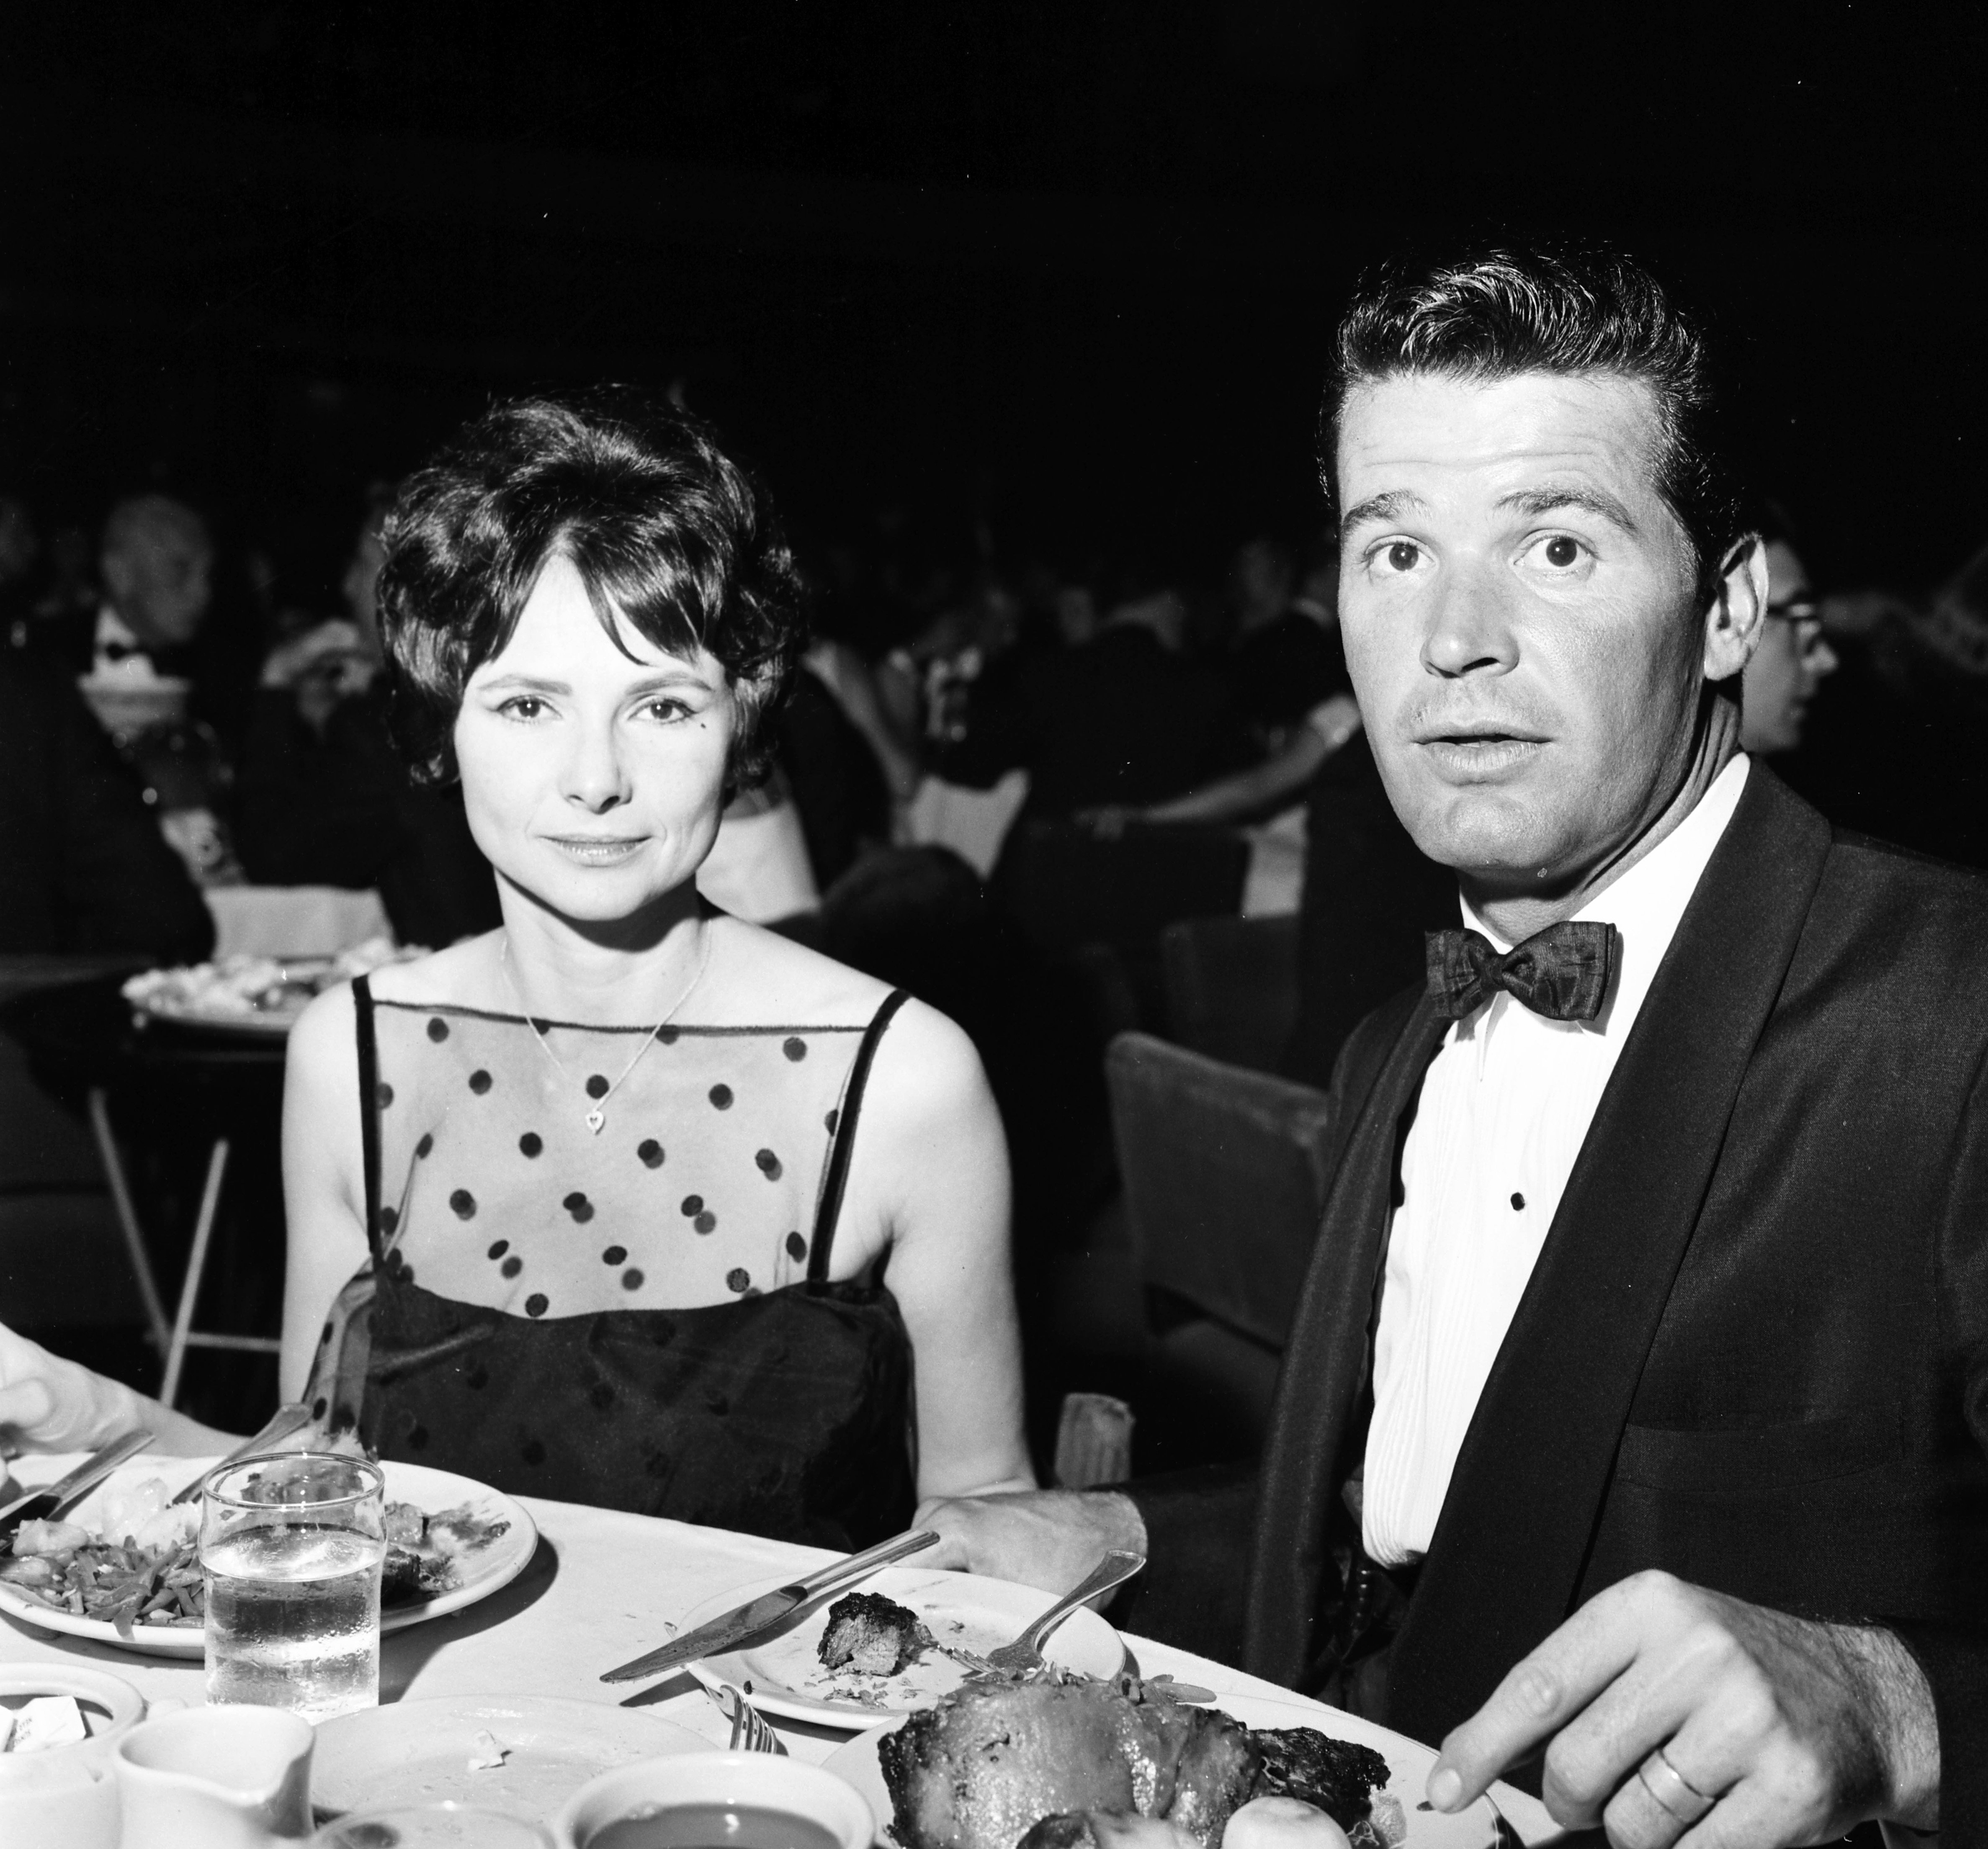  Actor James Garner with his wife Lois Clarke attends a party in Los Angeles, California, circa 1958 | Source: Getty Images